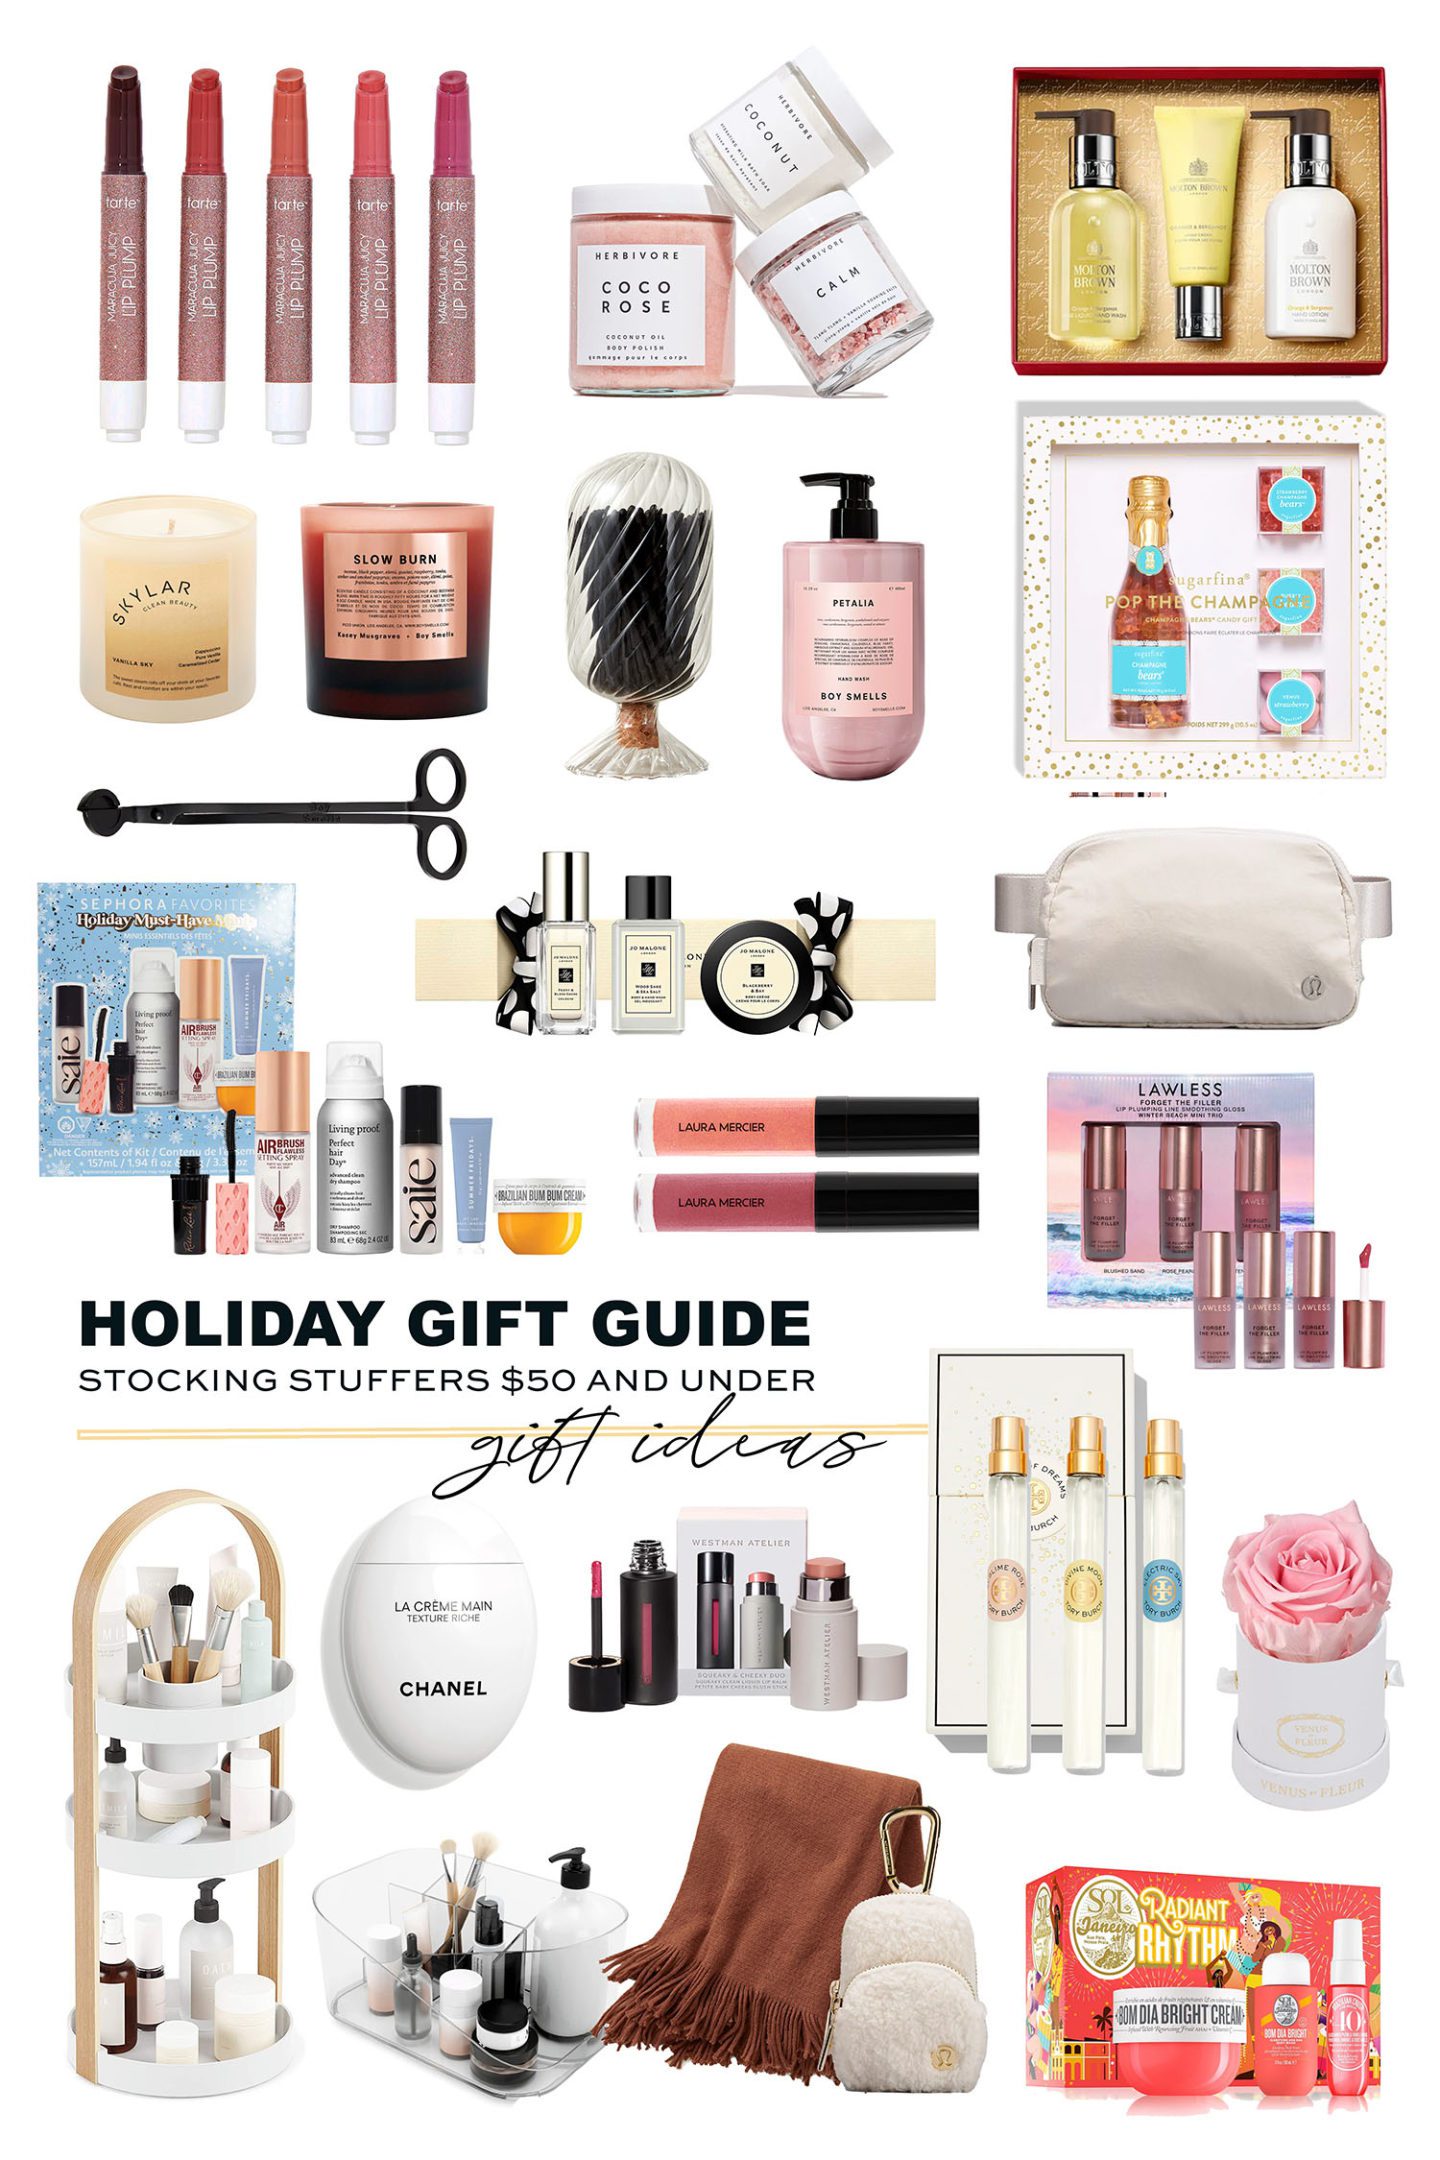 Holiday Gift Ideas $50 and Under